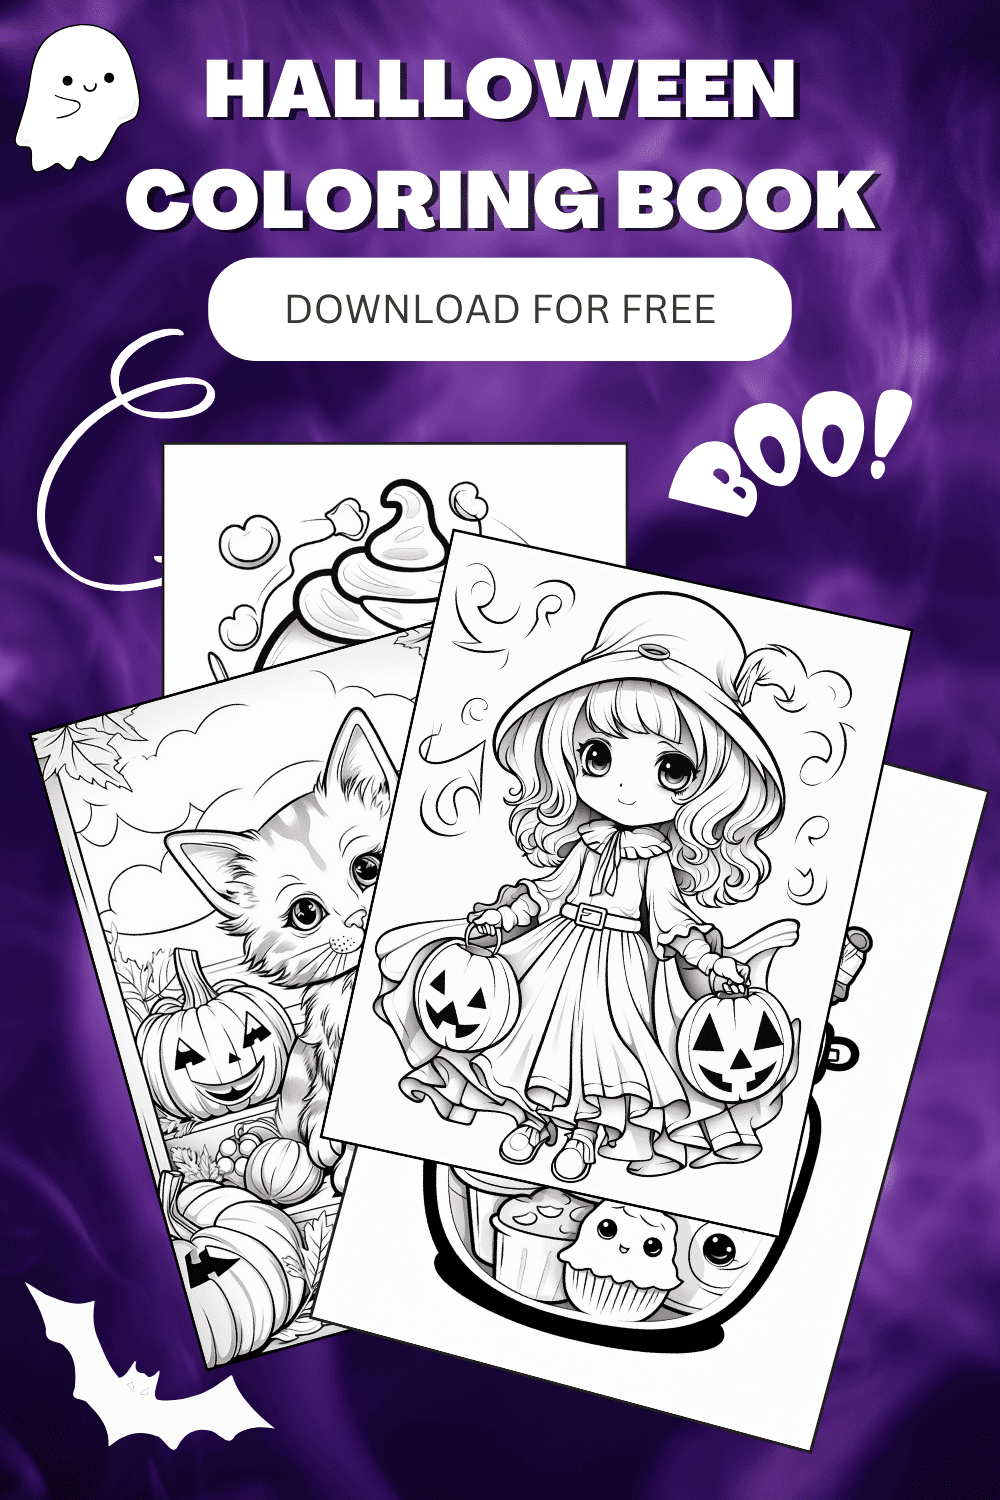 2 Free Printable Halloween Coloring Books for Kids (No Strings Attached)